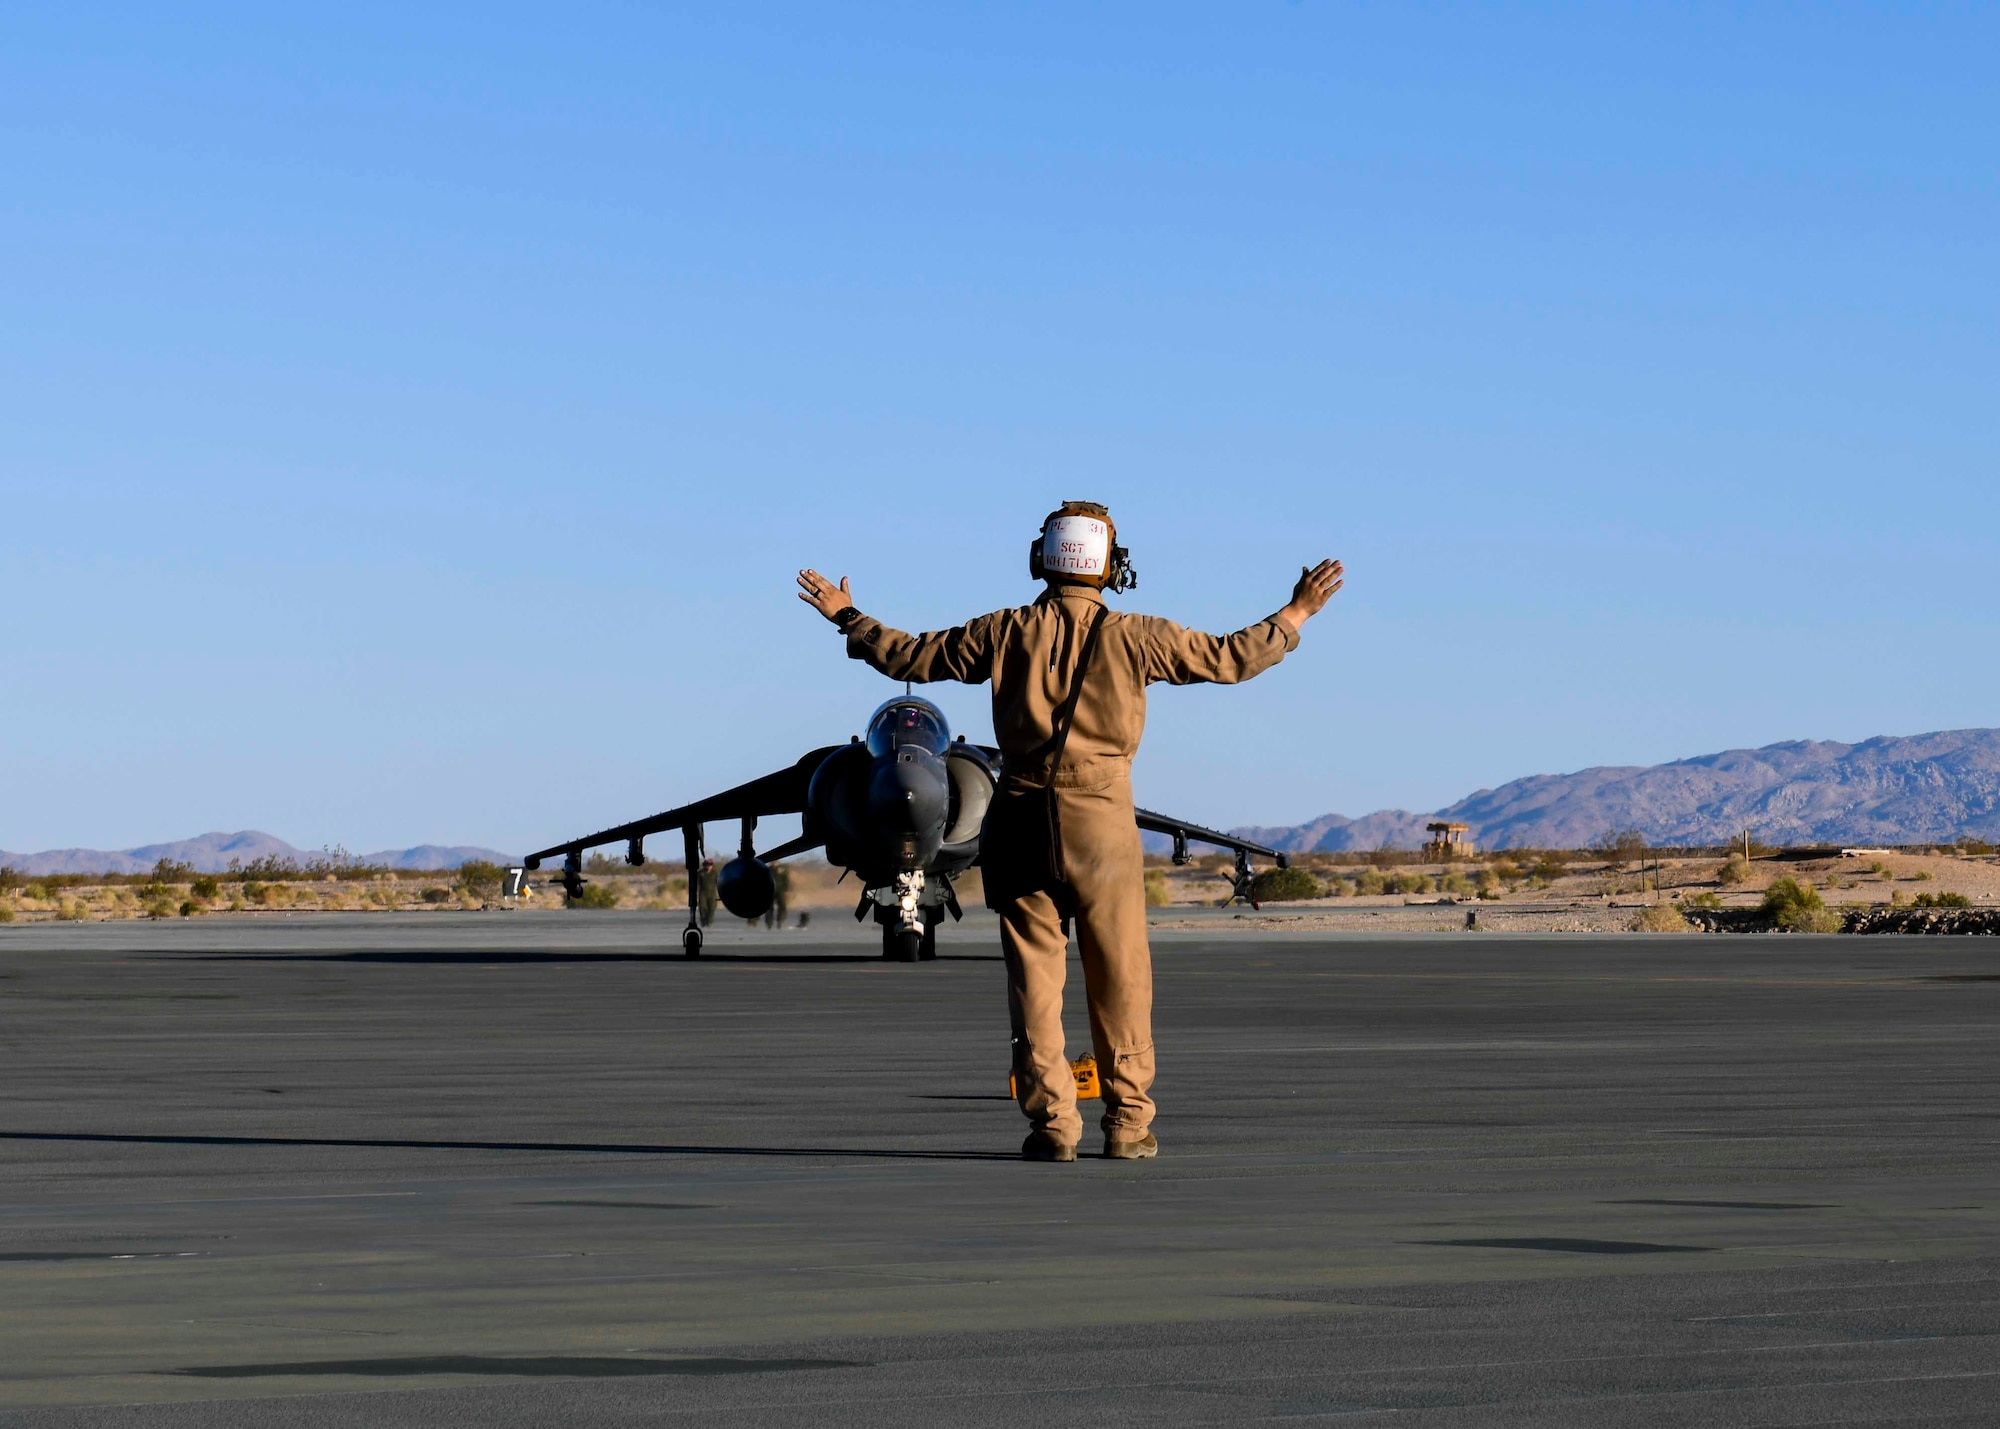 A U.S. Marine assigned to the Marine Corps Air Ground Combat Center directs a Harrier Jump Jet to a spot on the airfield for hot pit refueling at Marine Corps Air Ground Combat Center, California, May 4, 2021. This large-scale exercise prepared Marines for their upcoming deployments. (U.S. Air Force photo by Airman 1st Class Kiaundra Miller)